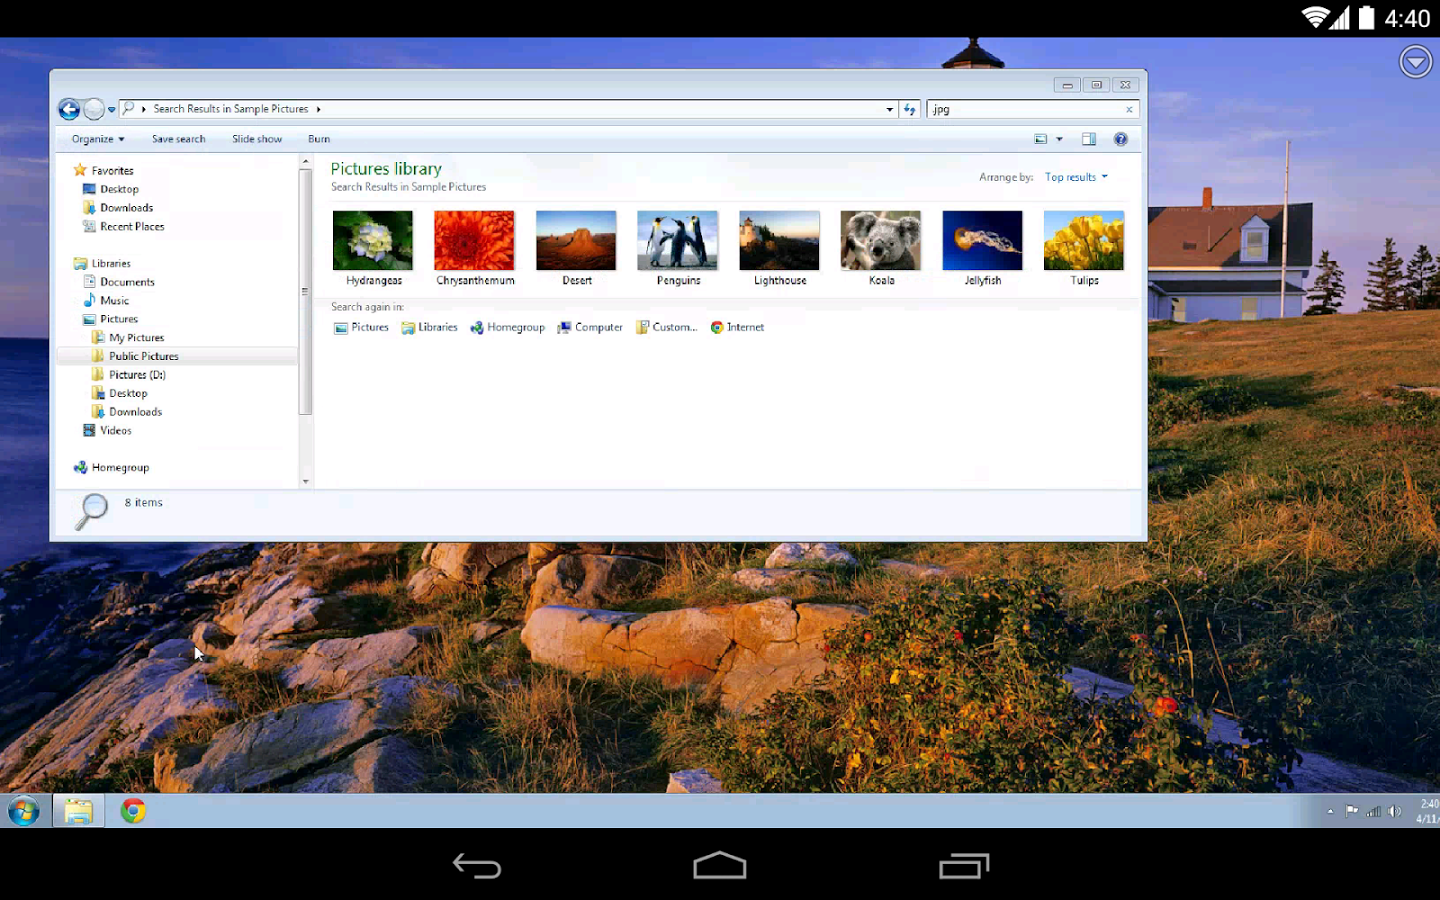 Chrome Remote Desktop comes to Android